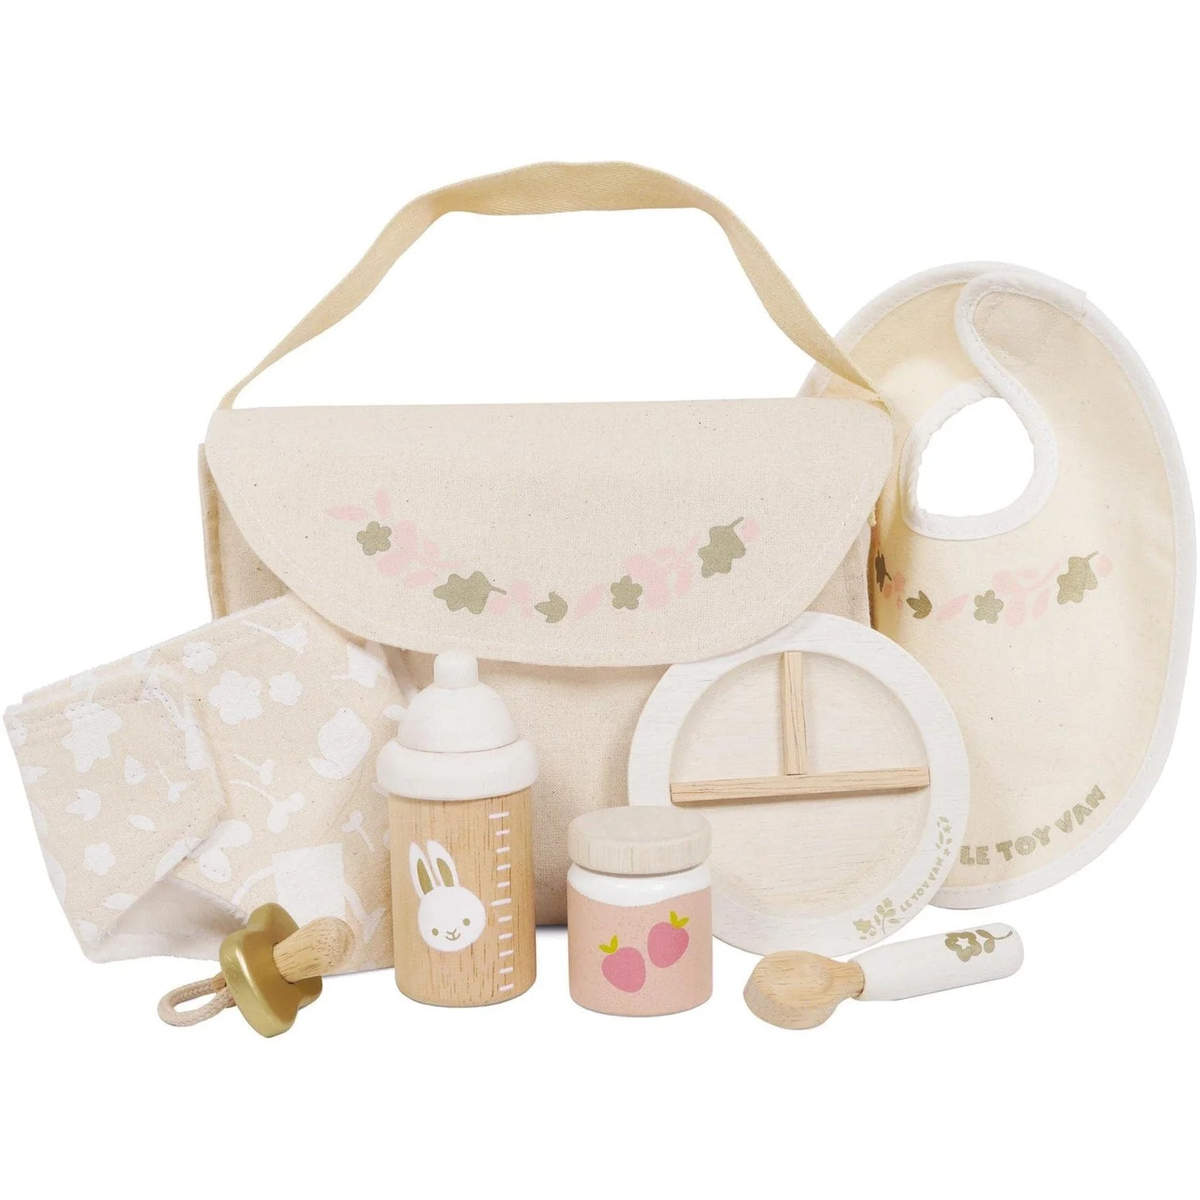 This set has everything you need for a baby, from nursing to